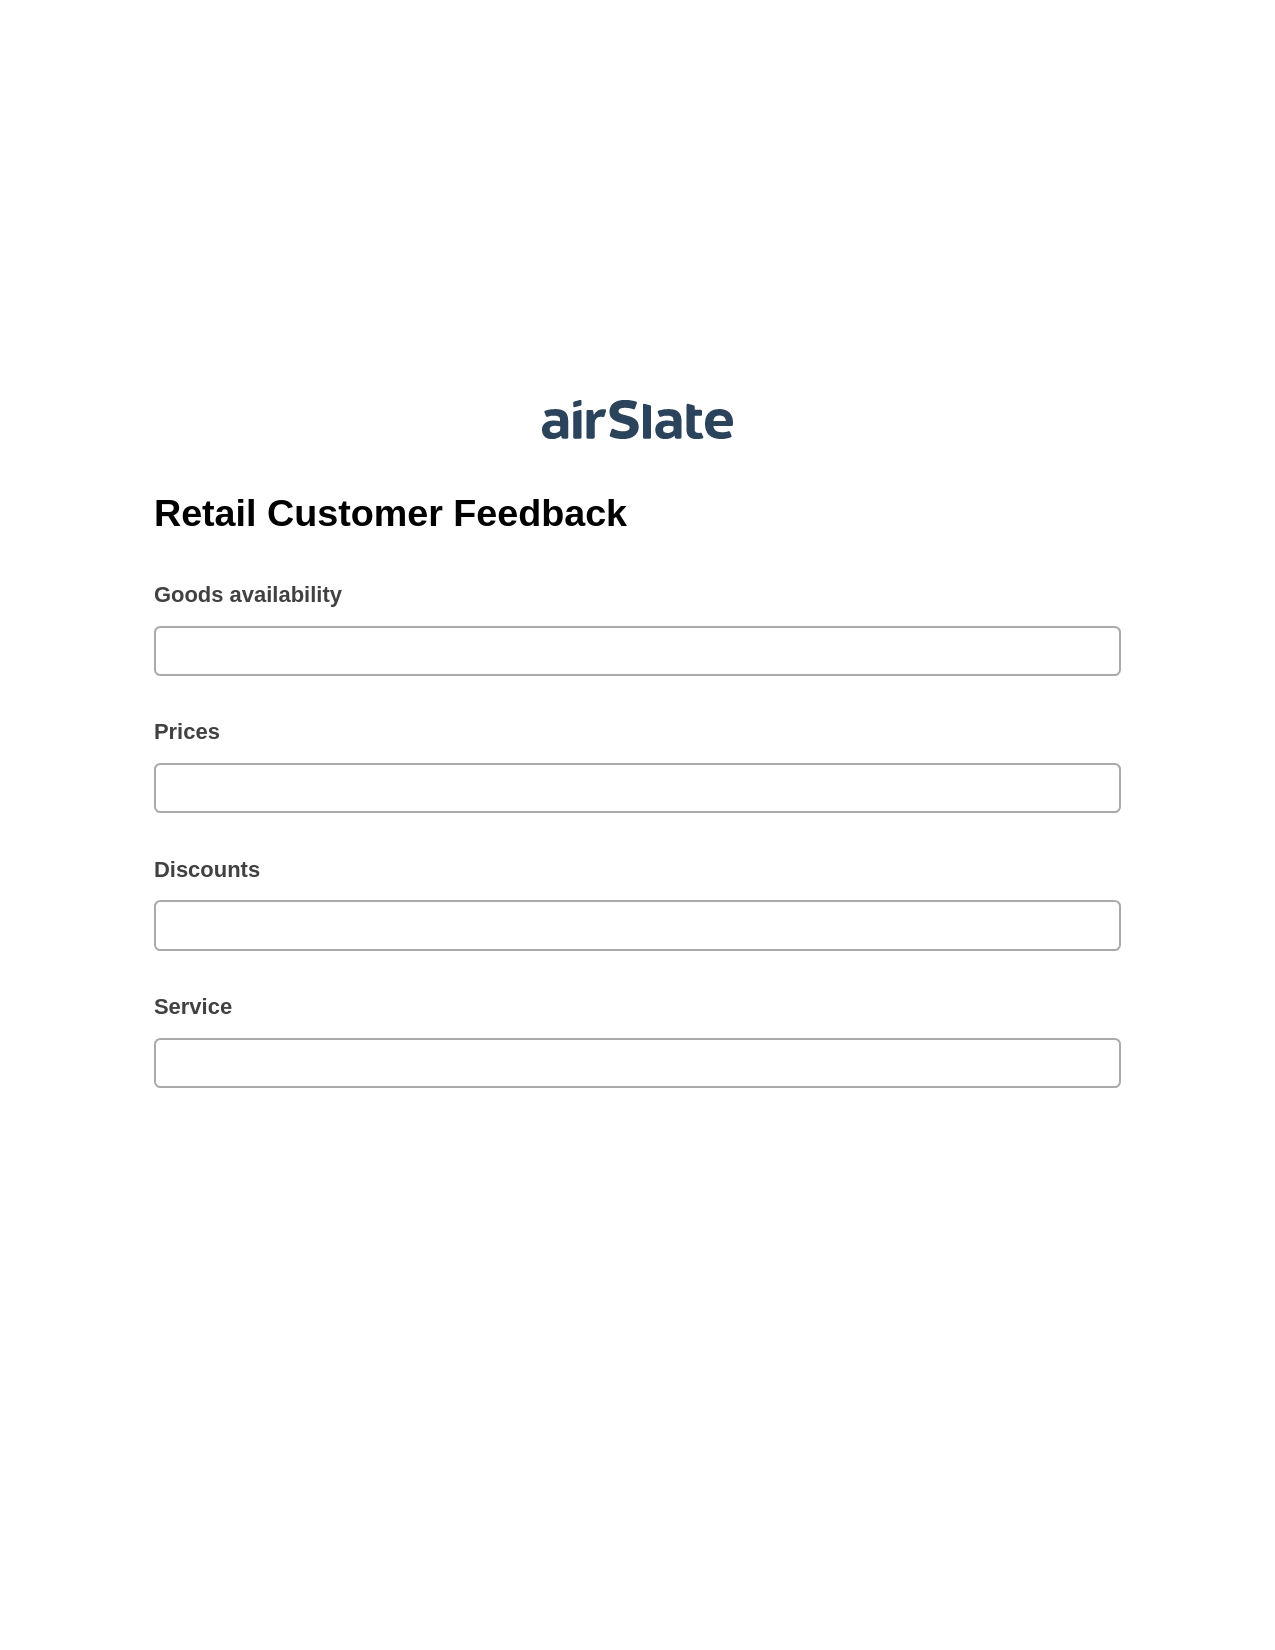 Multirole Retail Customer Feedback Pre-fill from CSV File Bot, Assign Slate Name Bot, Export to Excel 365 Bot